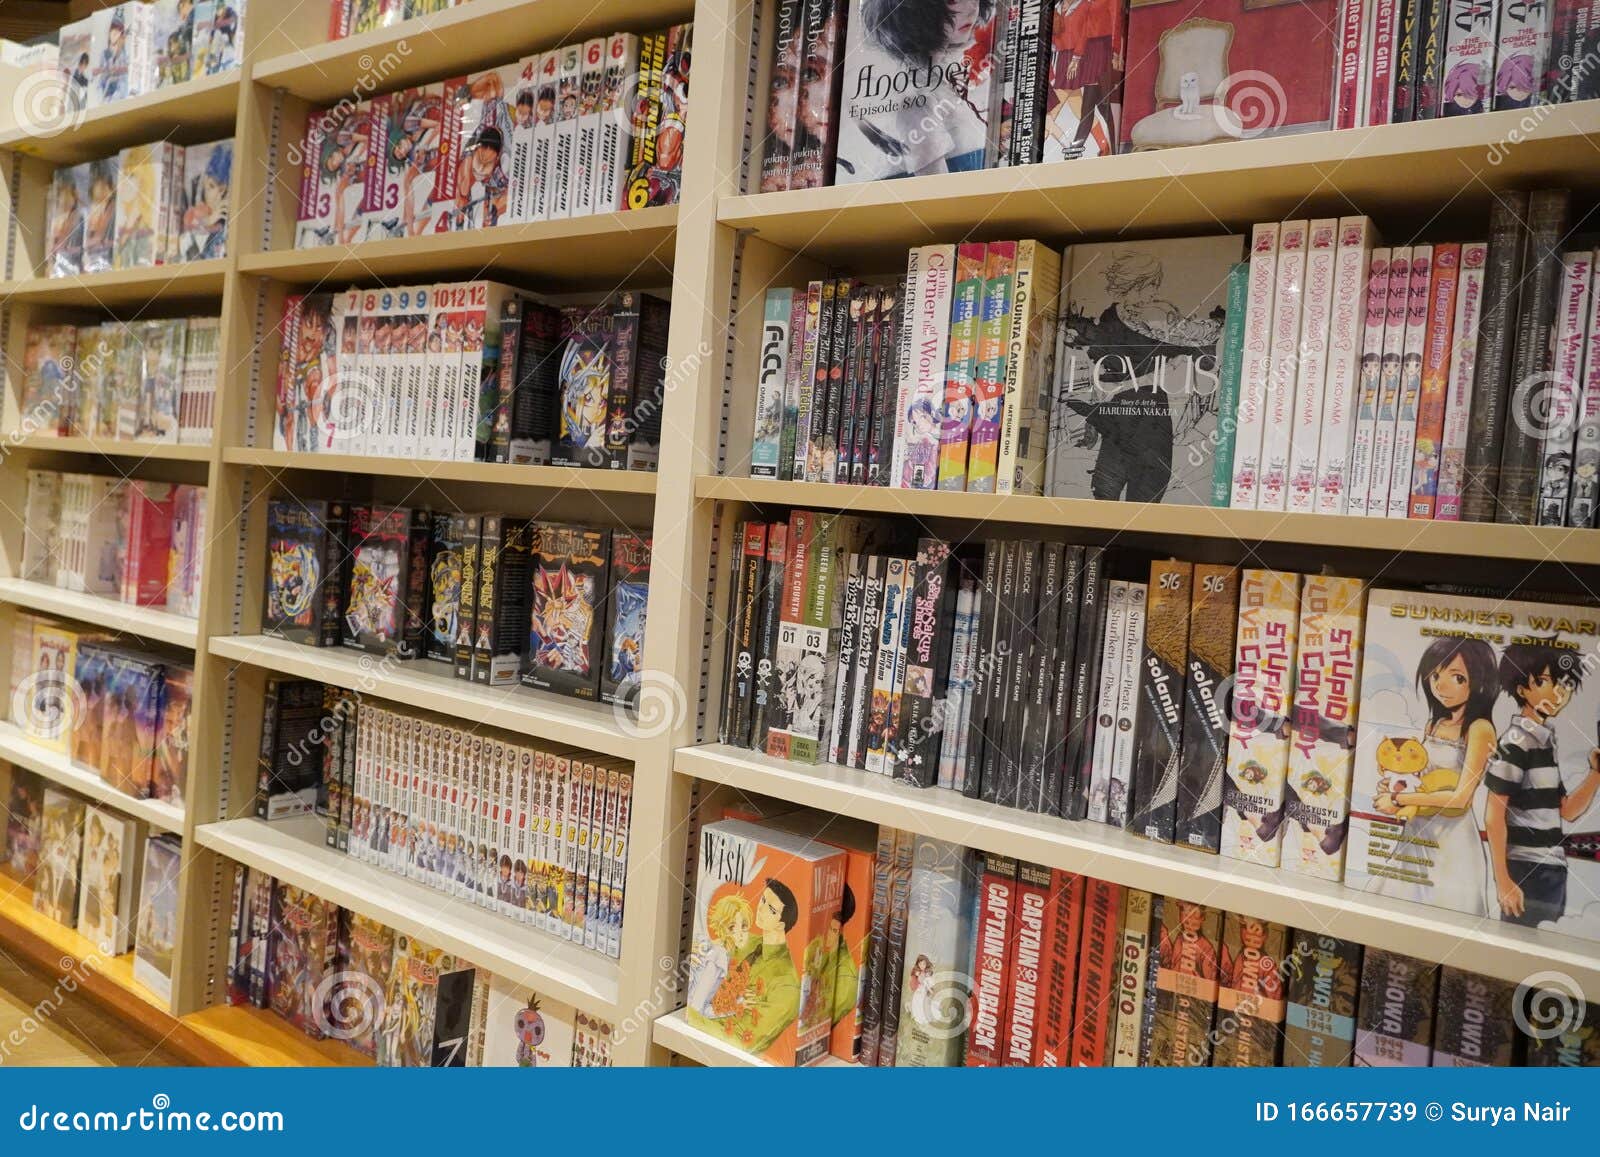 Various Japanese Cartoon Books For Sale In A Bookshop Anime Mange Various Mangas On Display For Sale Manga Comic Books Editorial Stock Image Image Of Magazine Comic